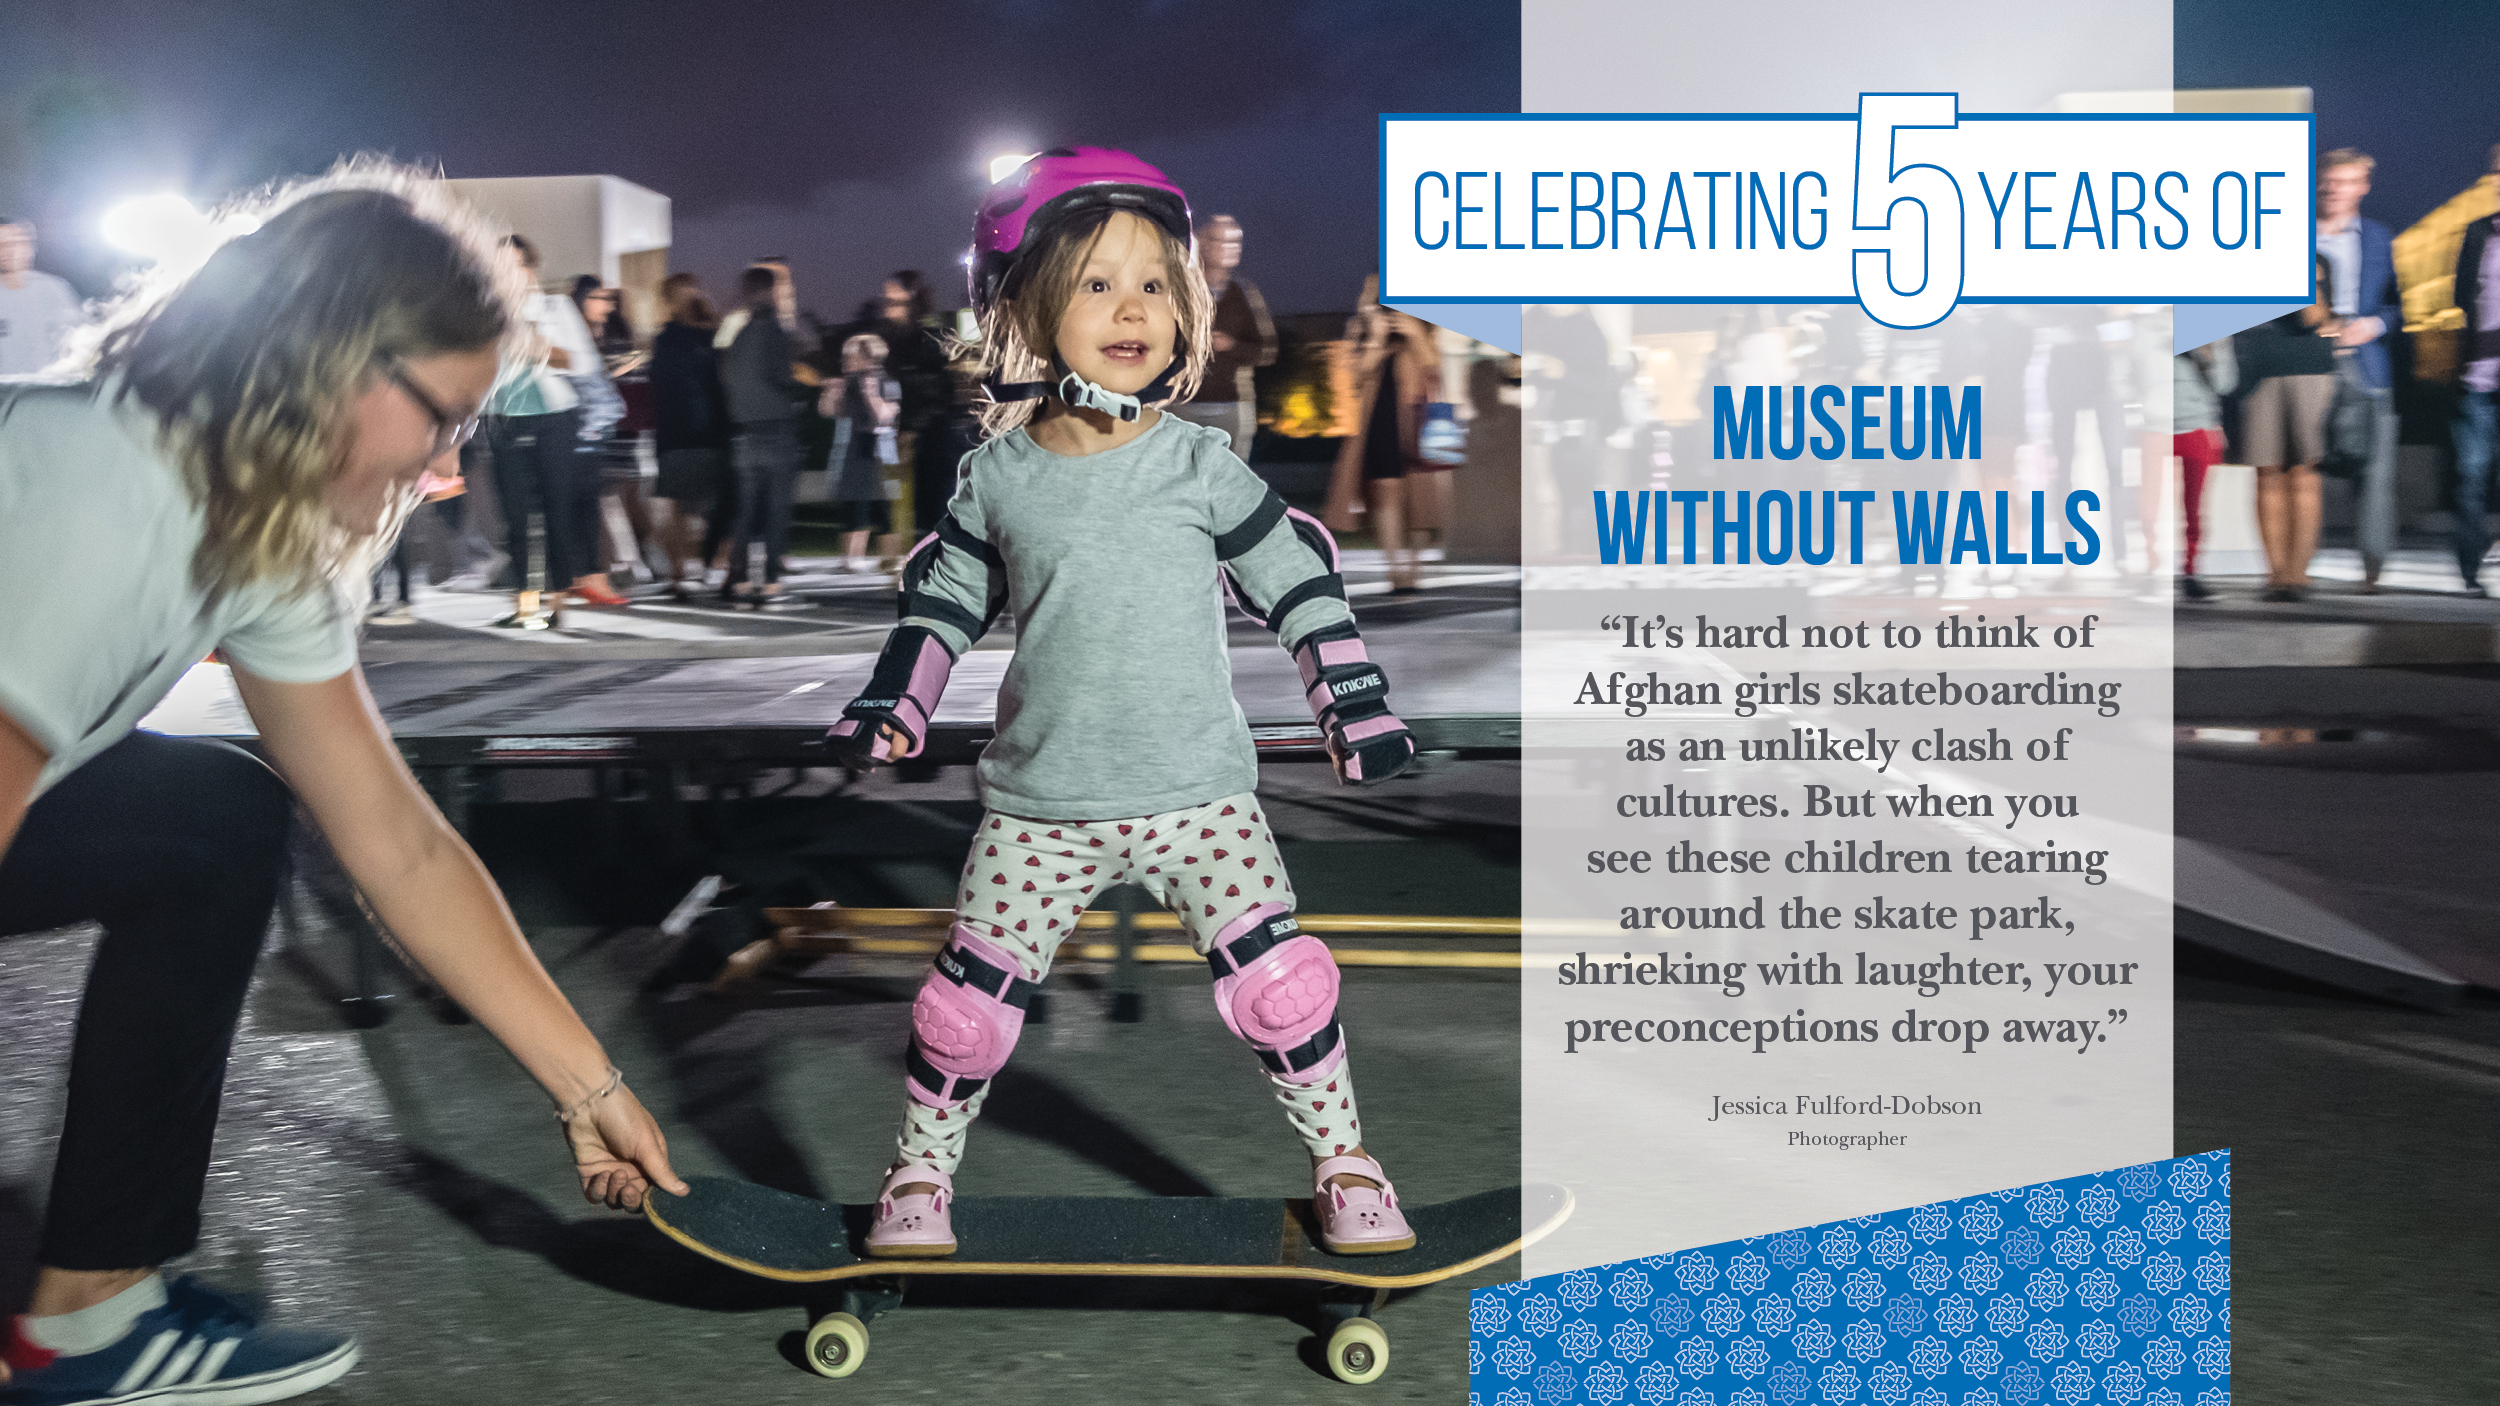 A woman steadies an excited little girl on a skateboard.